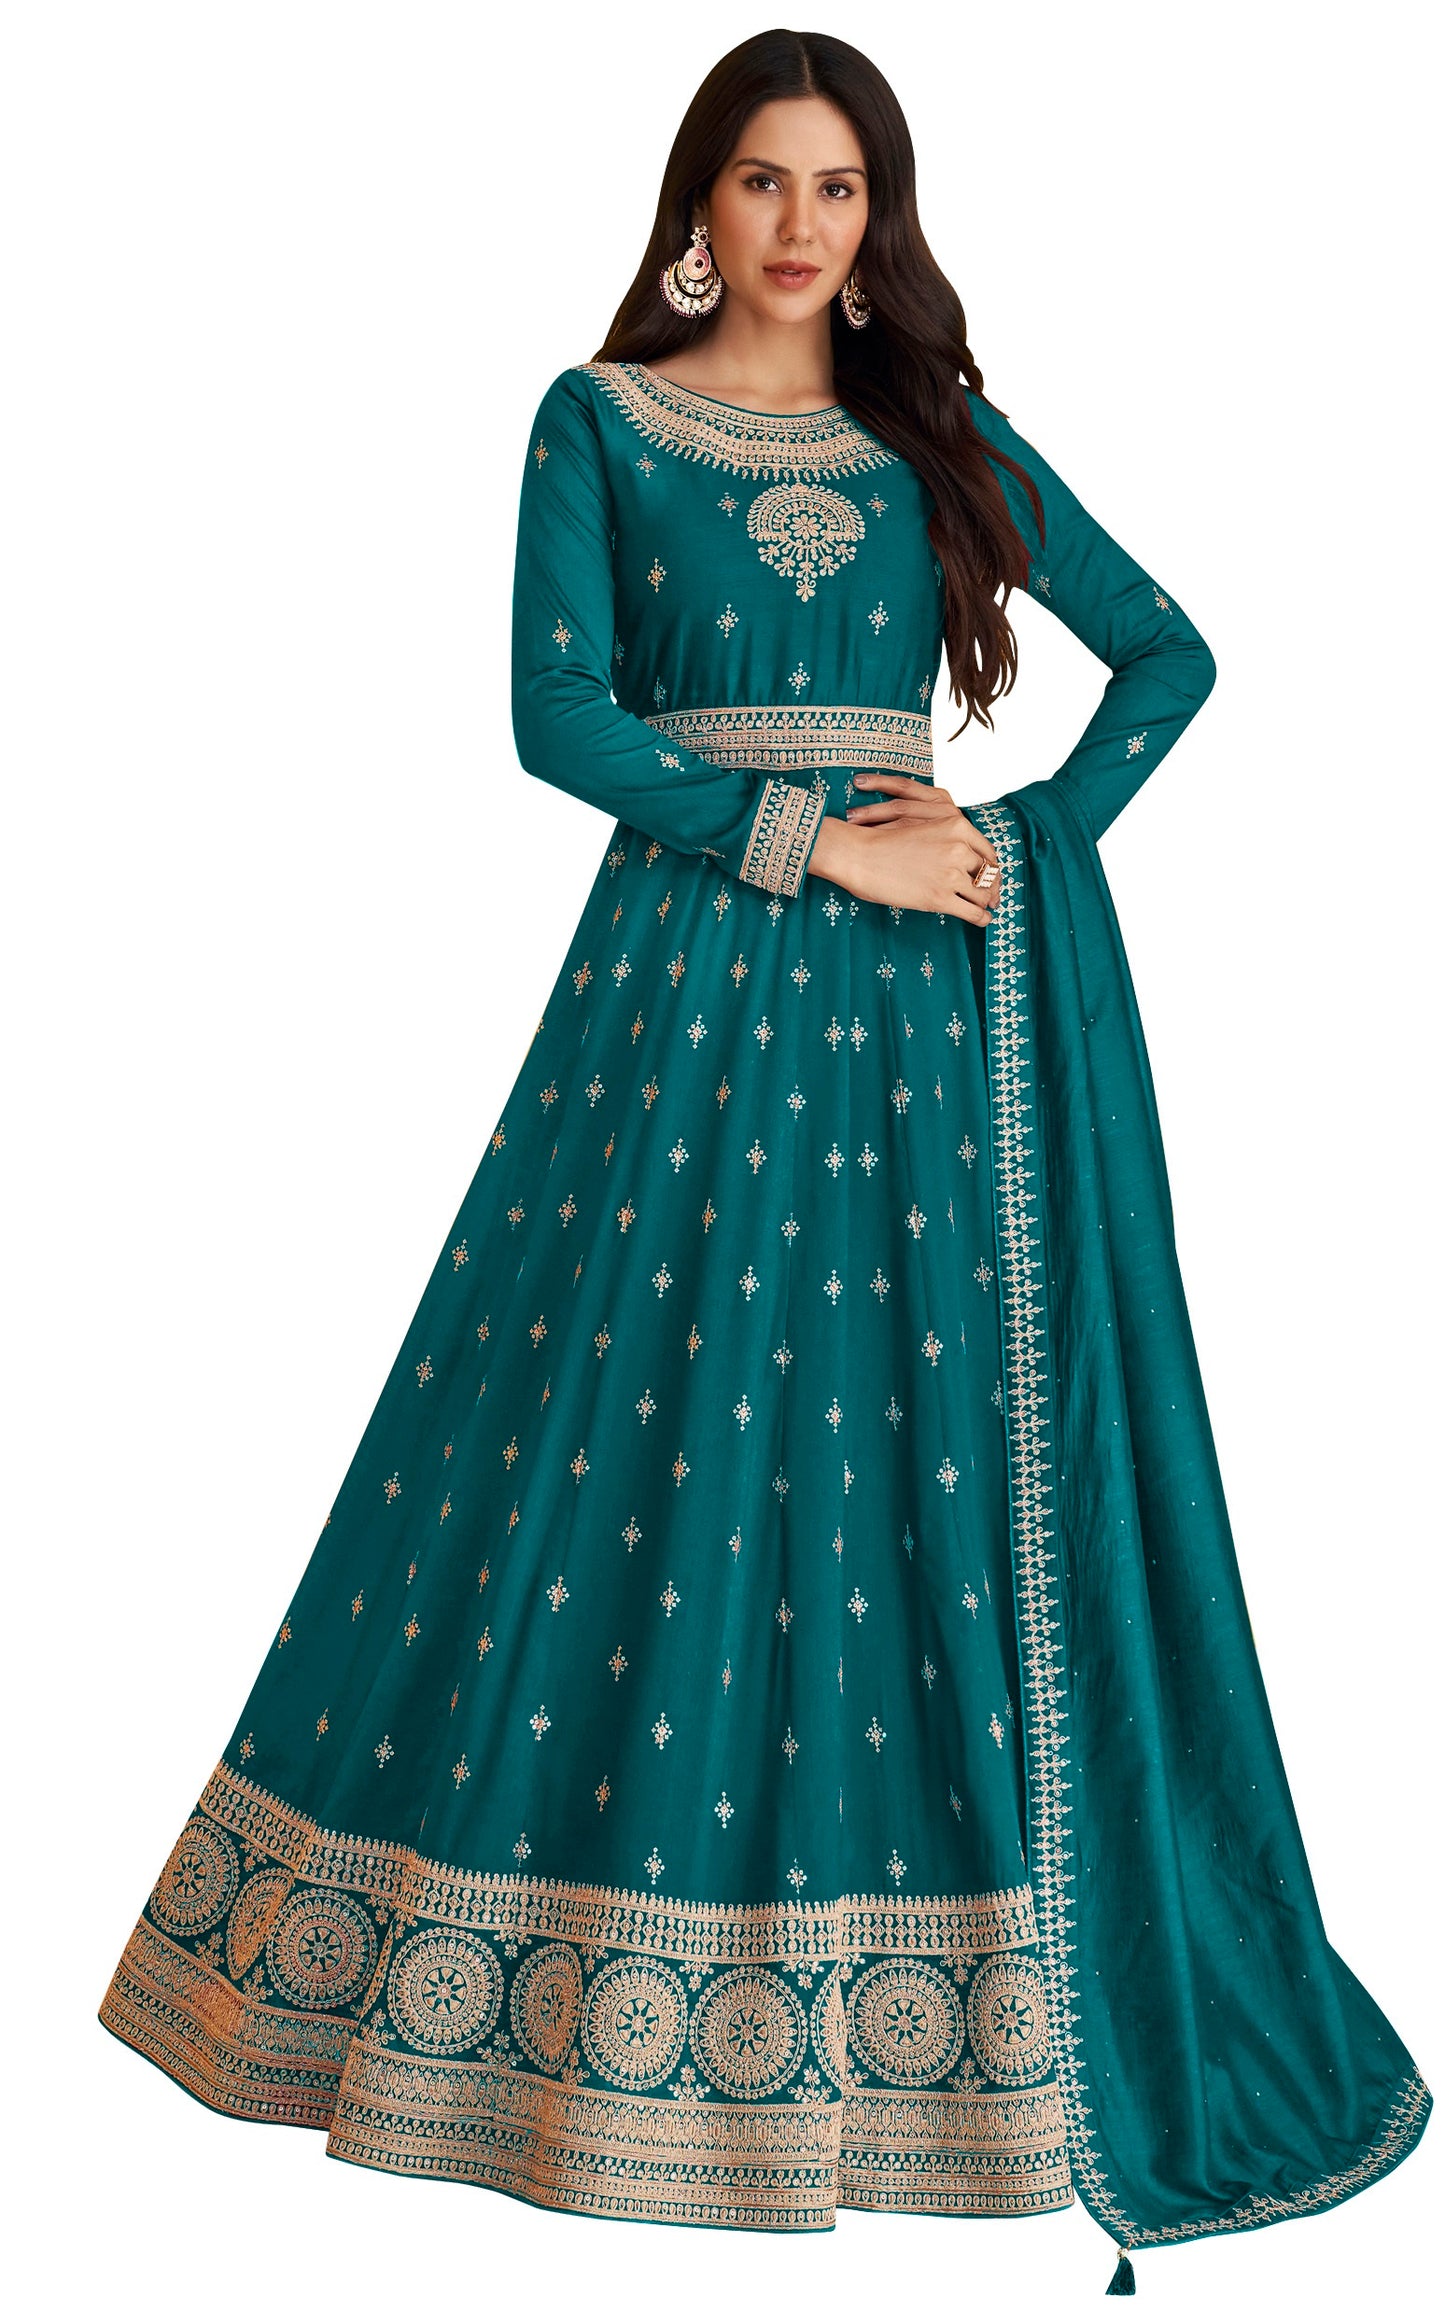 Sea Blue Color Faux Georgette With Embroidery Work Gown Anarkali Suit